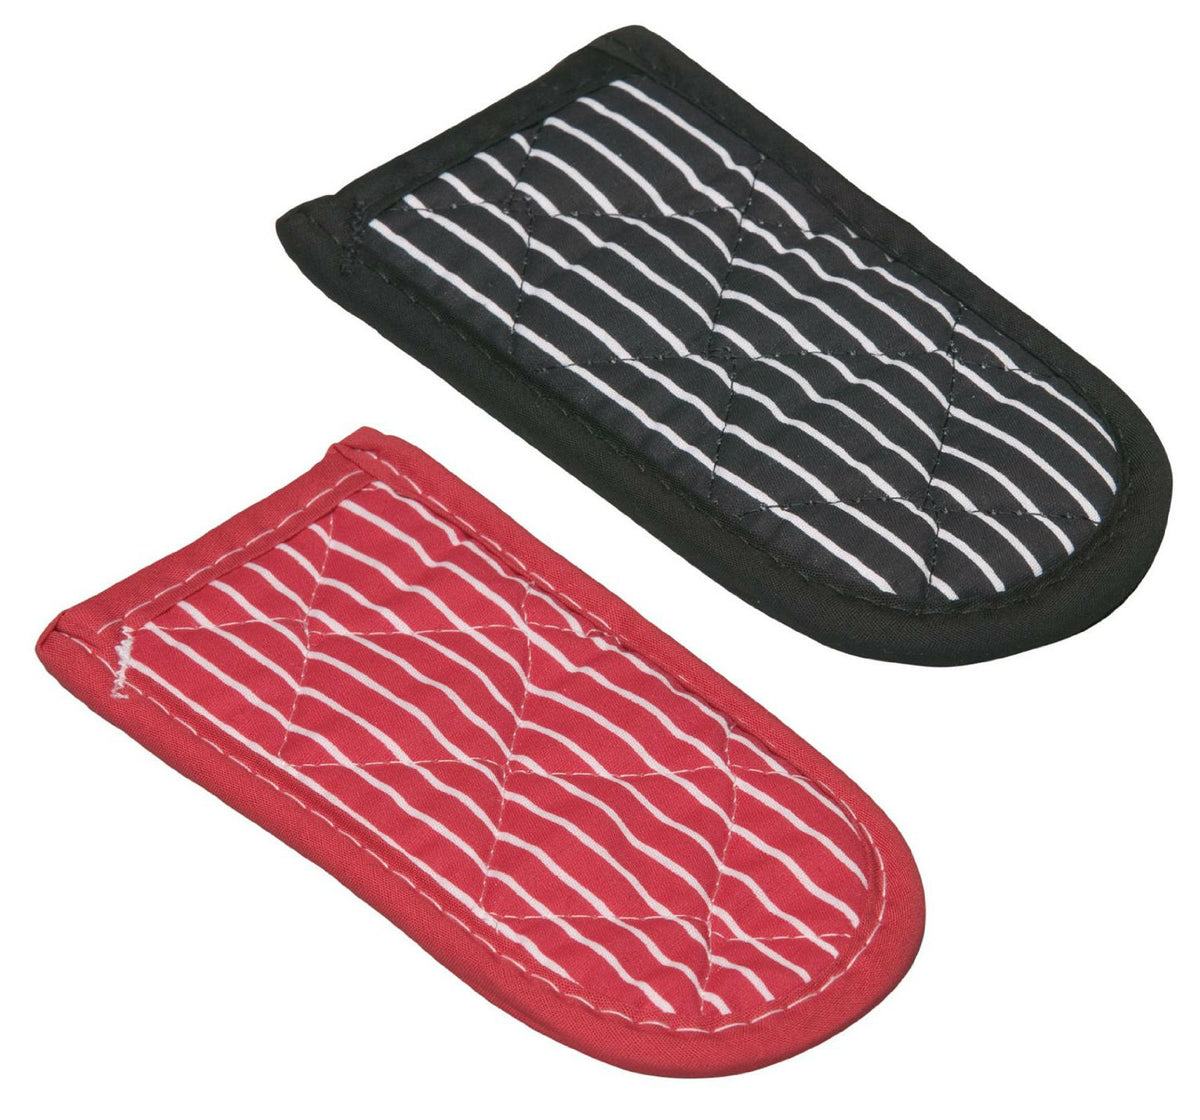 buy pot holders, mitts & kitchen textiles at cheap rate in bulk. wholesale & retail kitchen tools & supplies store.